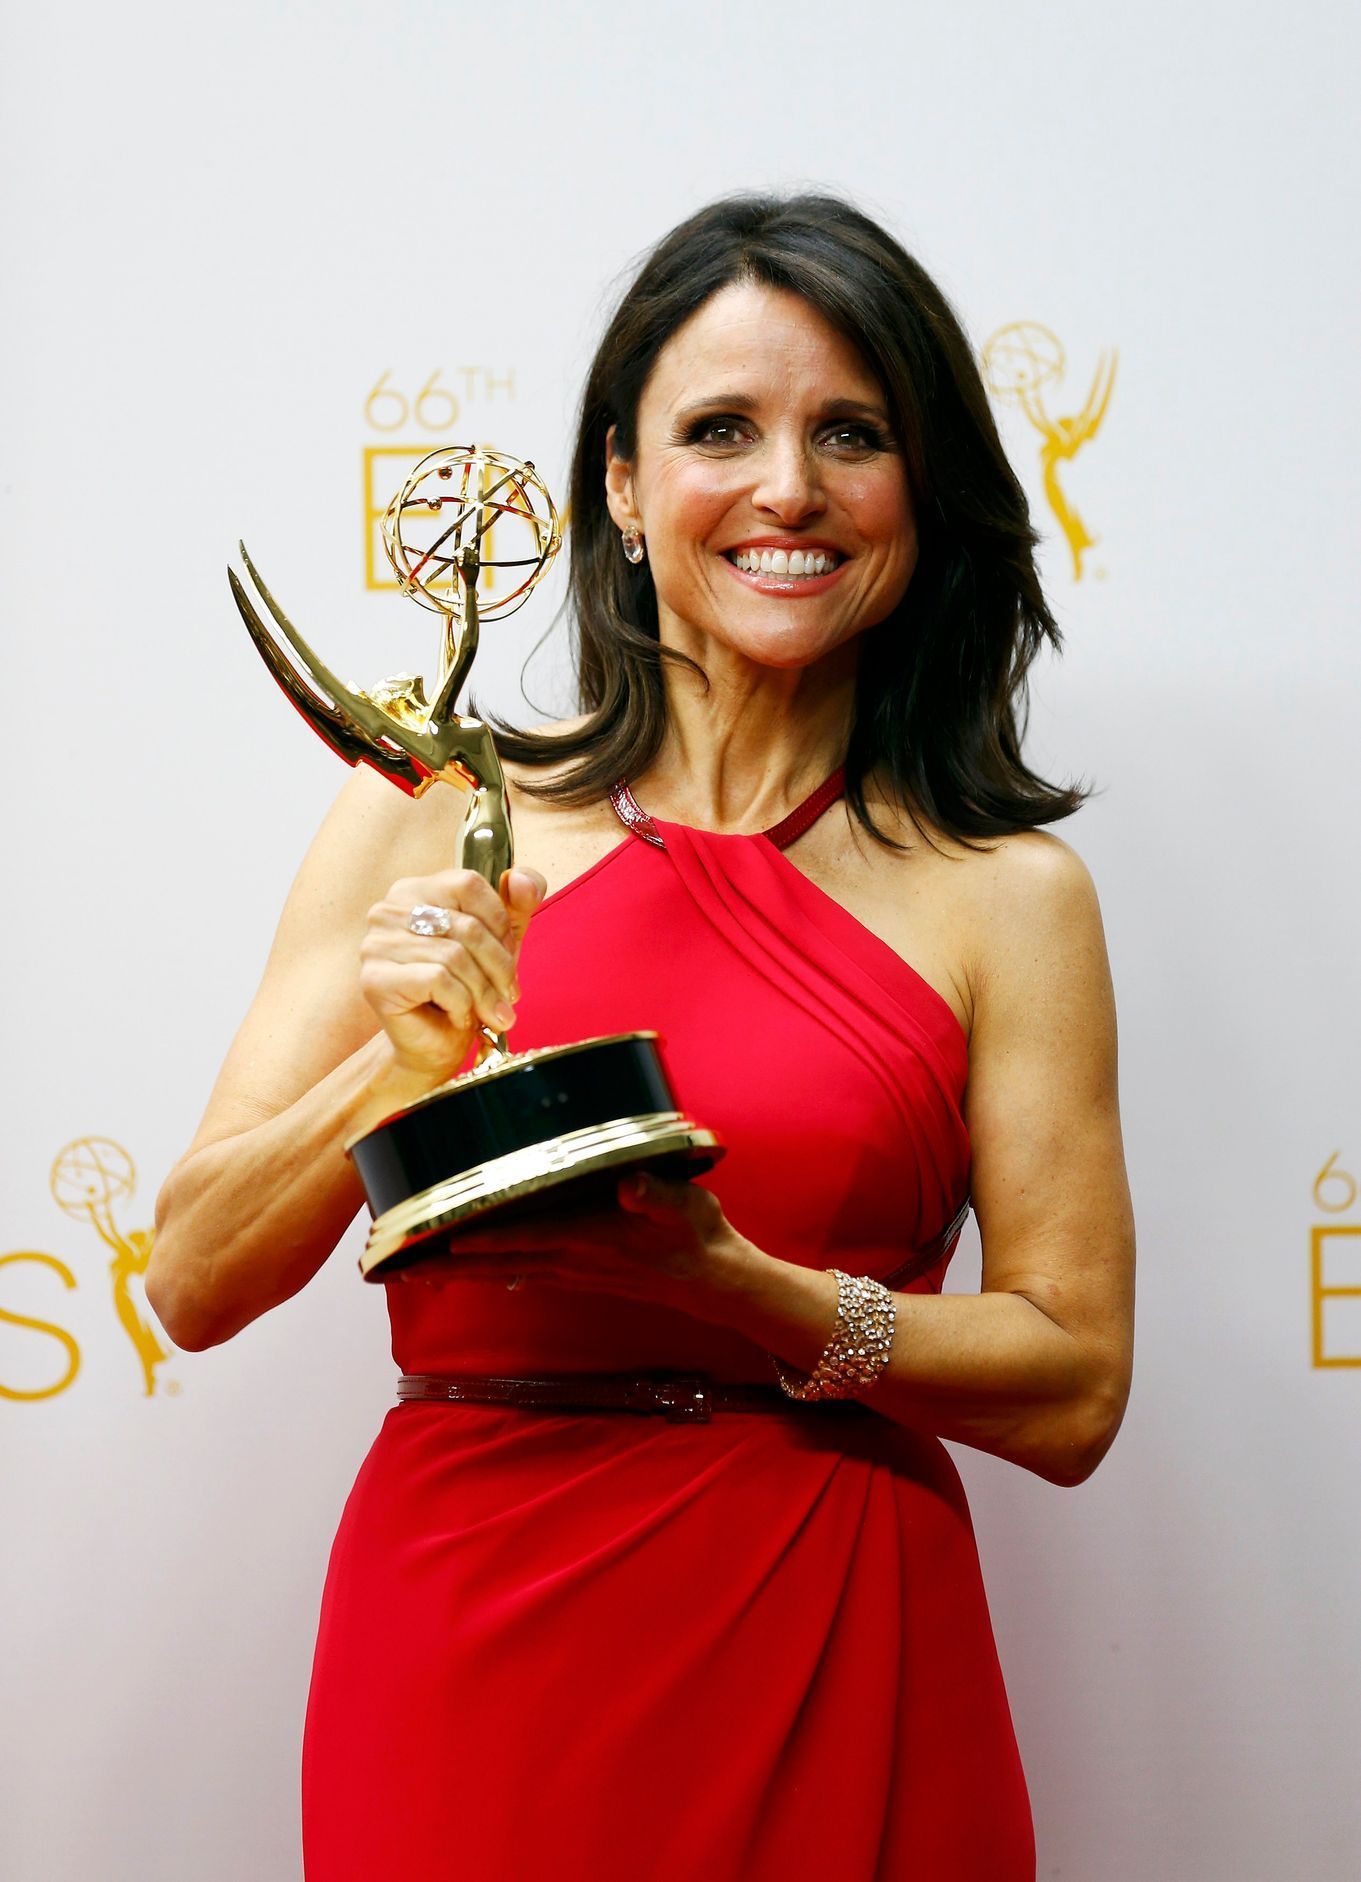 Julia Louis-Dreyfus poses with her award at the 66th Primetime Emmy Awards in Los Angeles